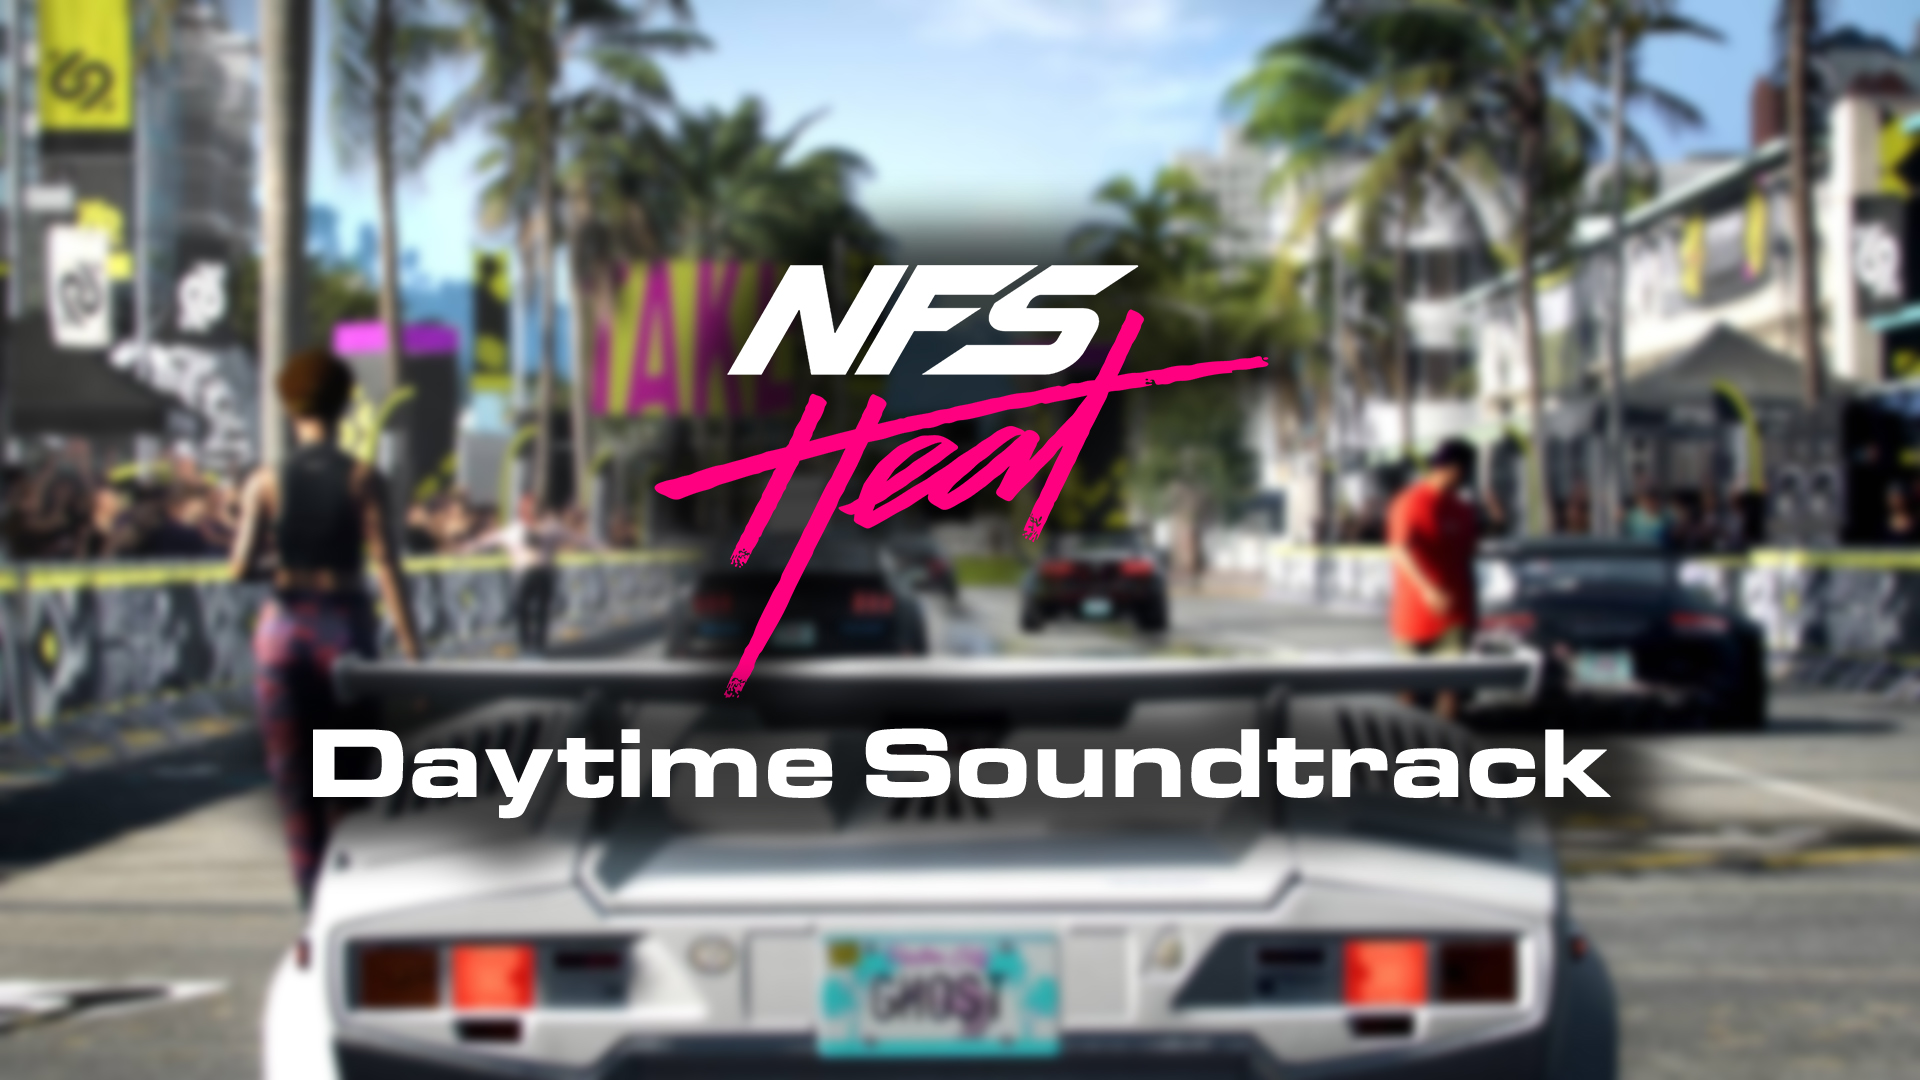 Need for Speed: Heat "Daytime Soundtrack"